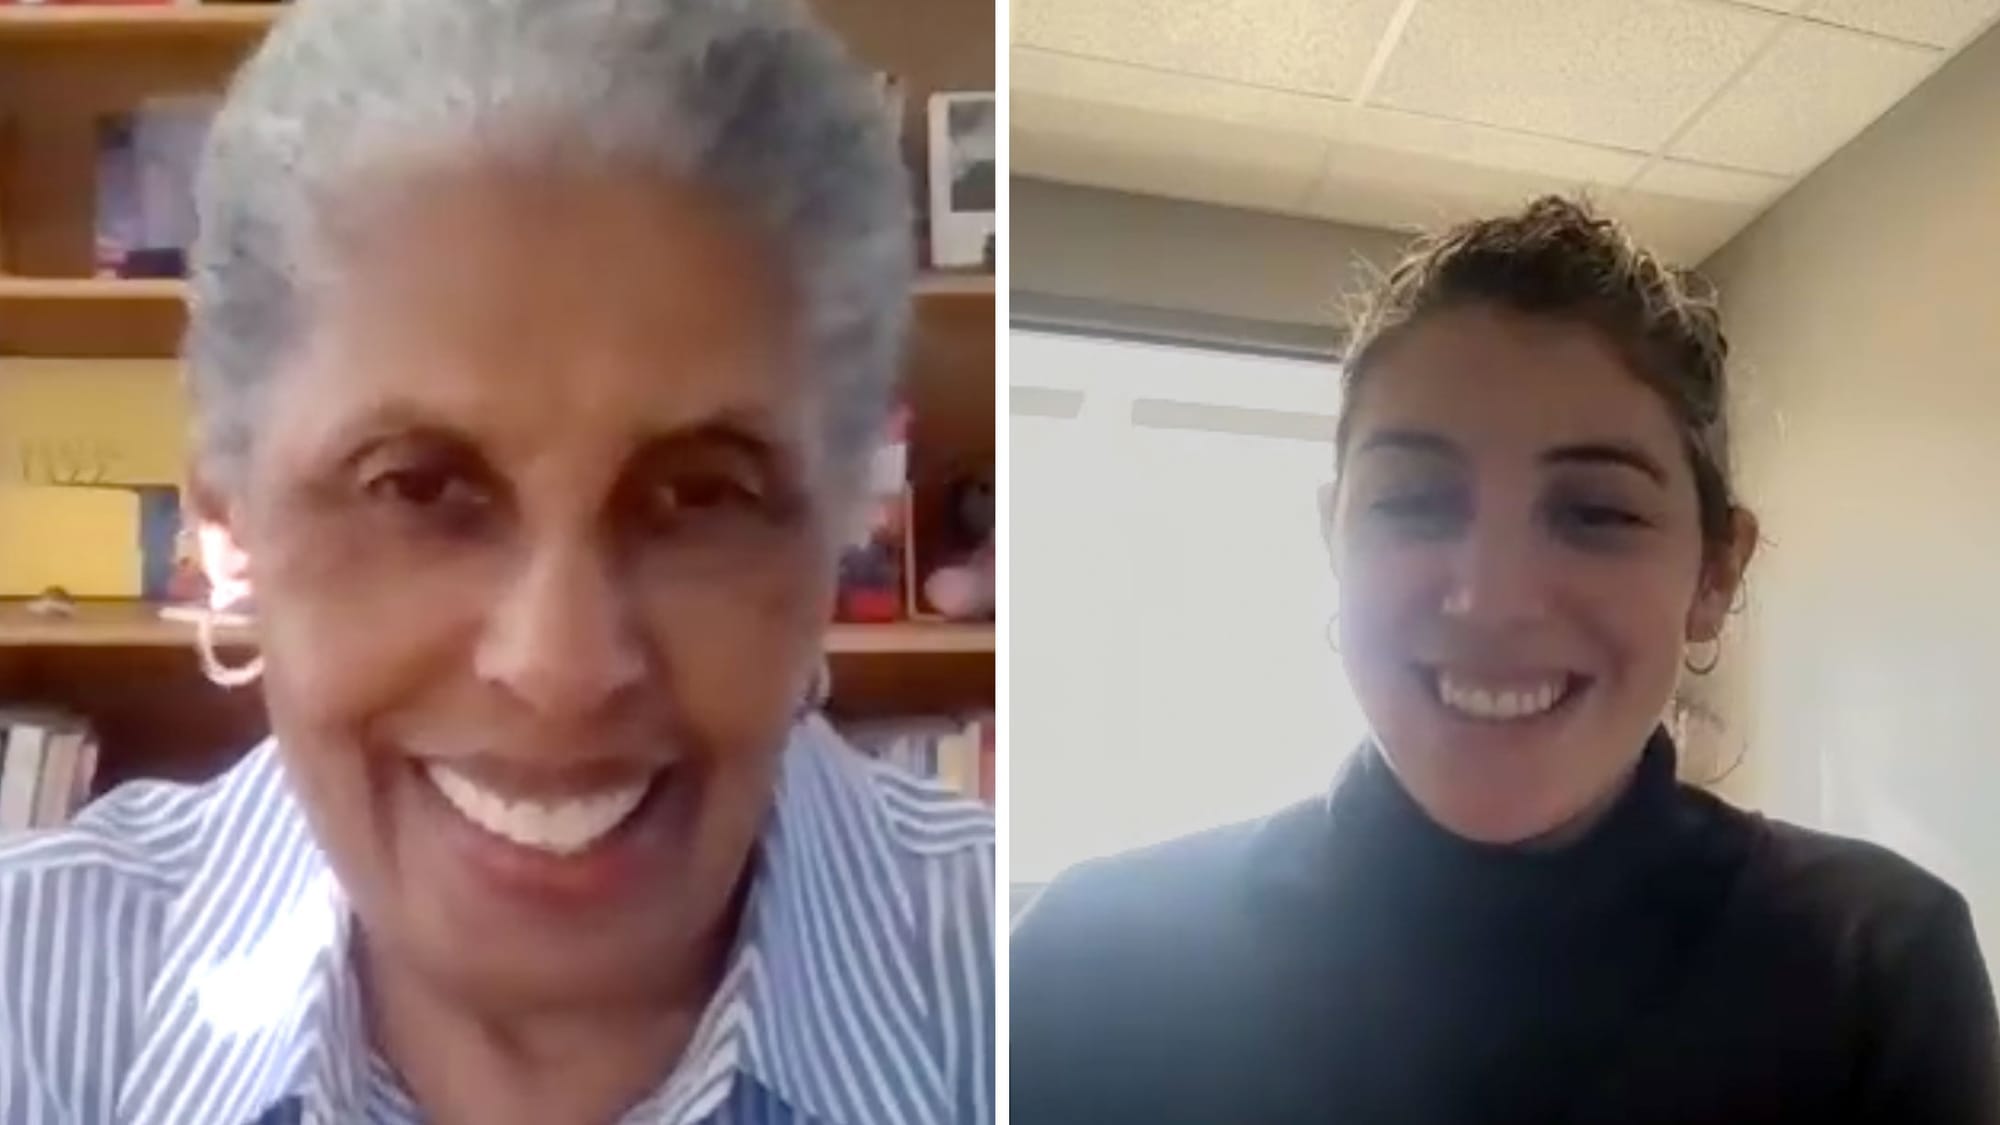 Screencaps of two smiling activists; k.e. harloe in a black turtleneck, and Barbara Smith in a crisp striped shirt